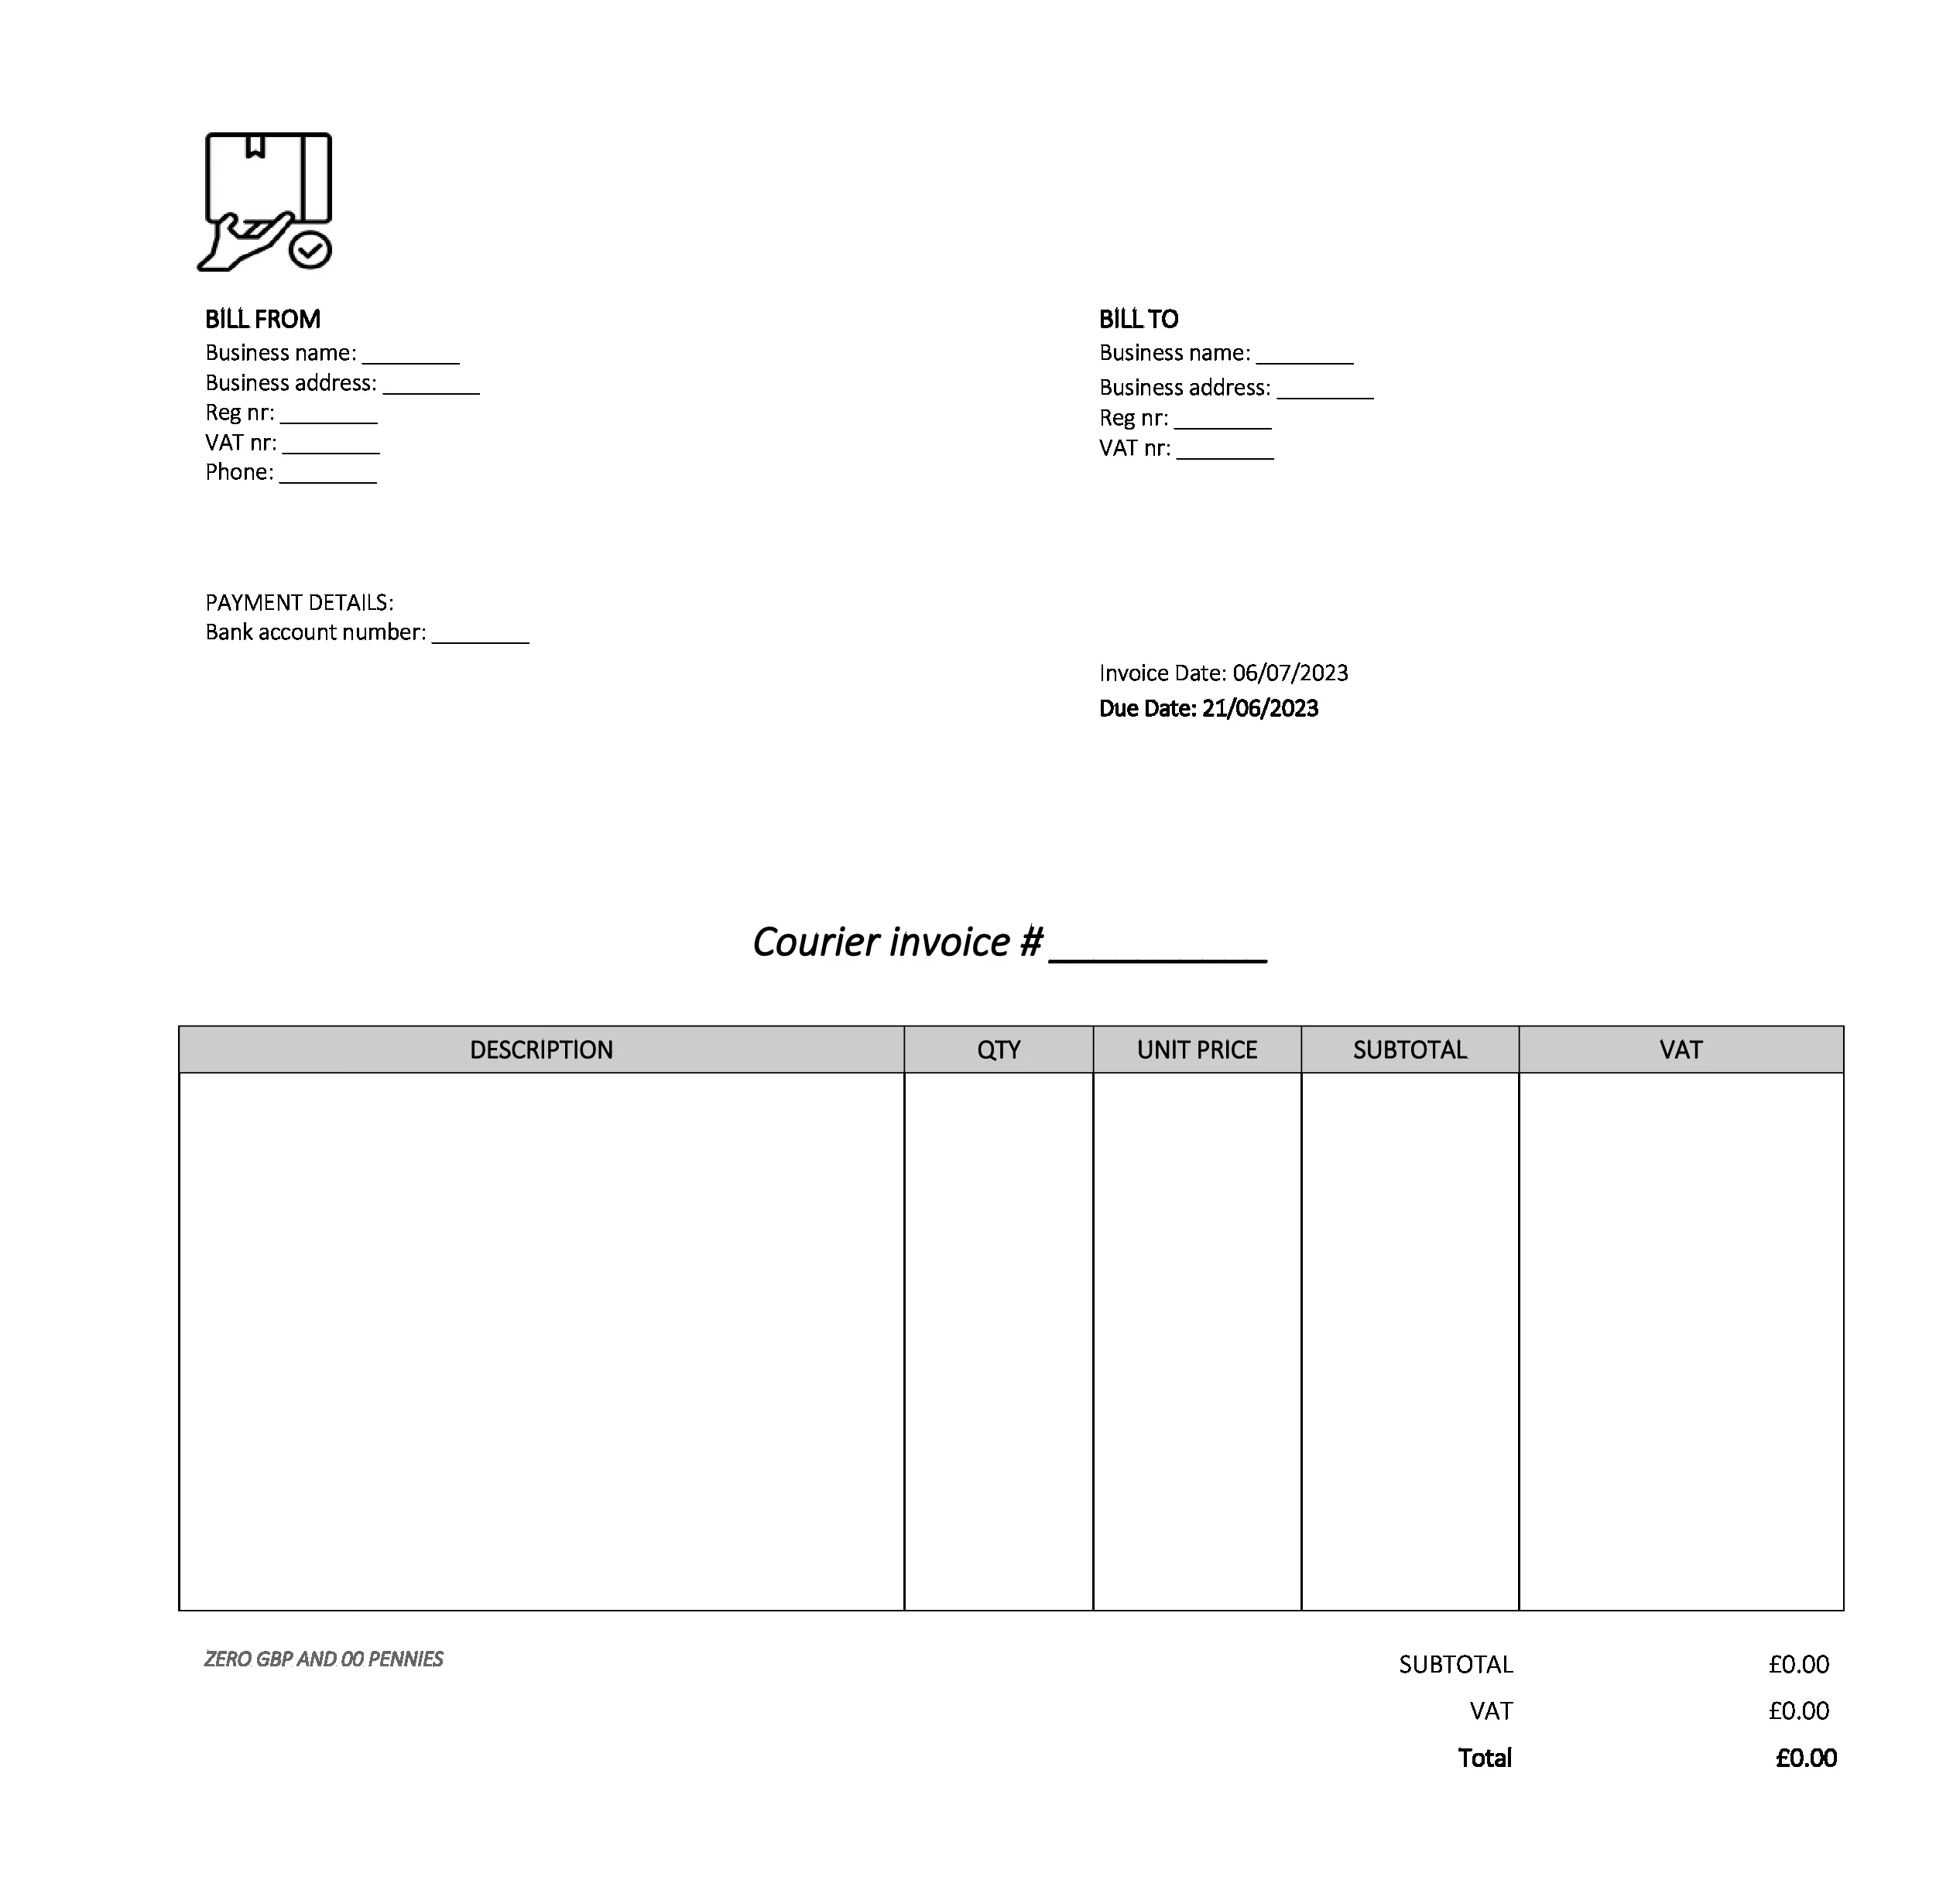 empty courier invoice template UK Excel / Google sheets